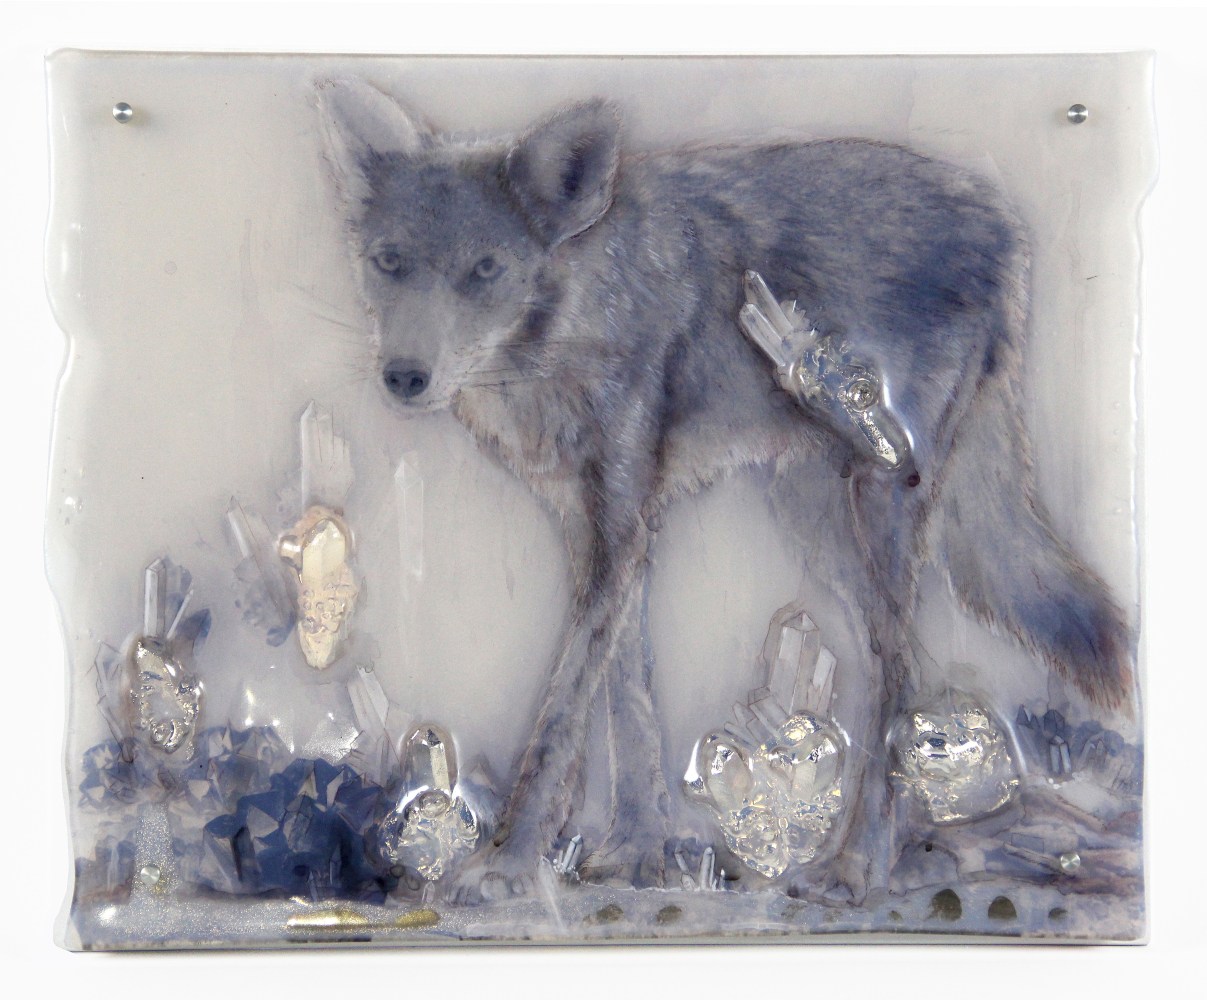 Sibylle Peretti
He is Nothing Much but Fur, 2021
kiln formed glass, engraved, painted, silvered, paper applique
17h x 20w x 1d in